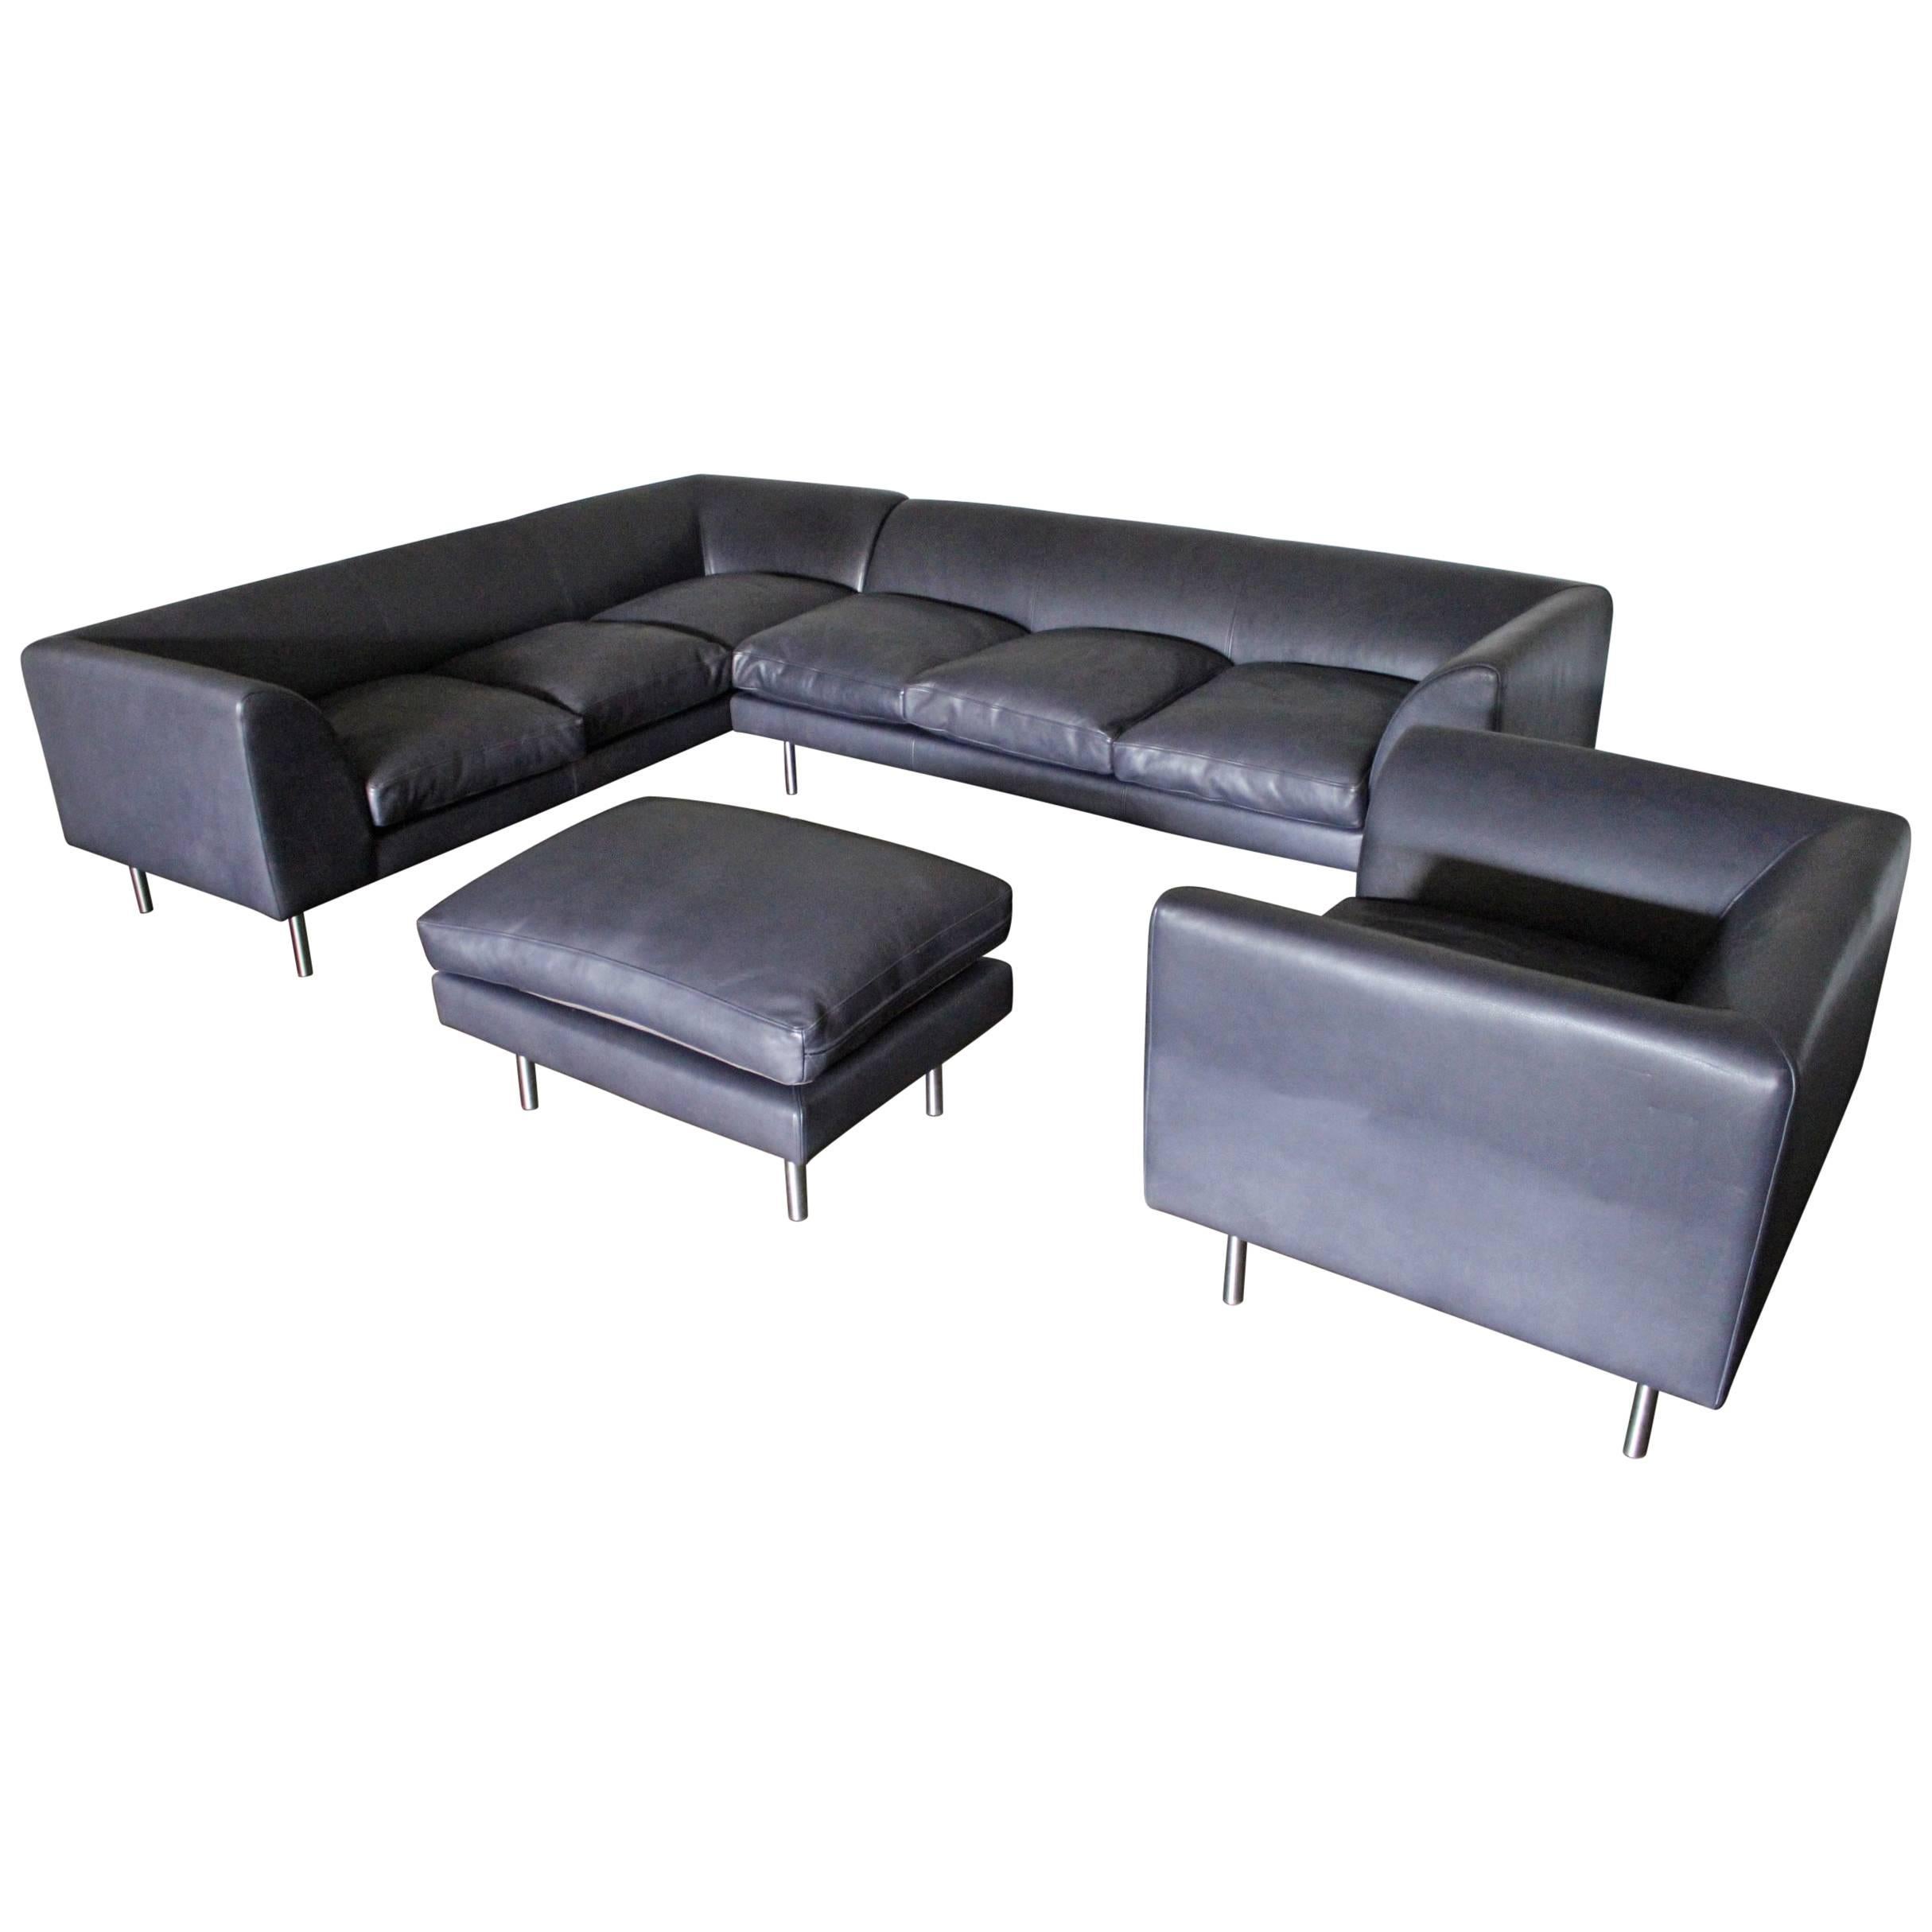 SCP “Woodgate” Six-Seat L-Shape Sofa, Armchair and Ottoman Suite in Navy Leather